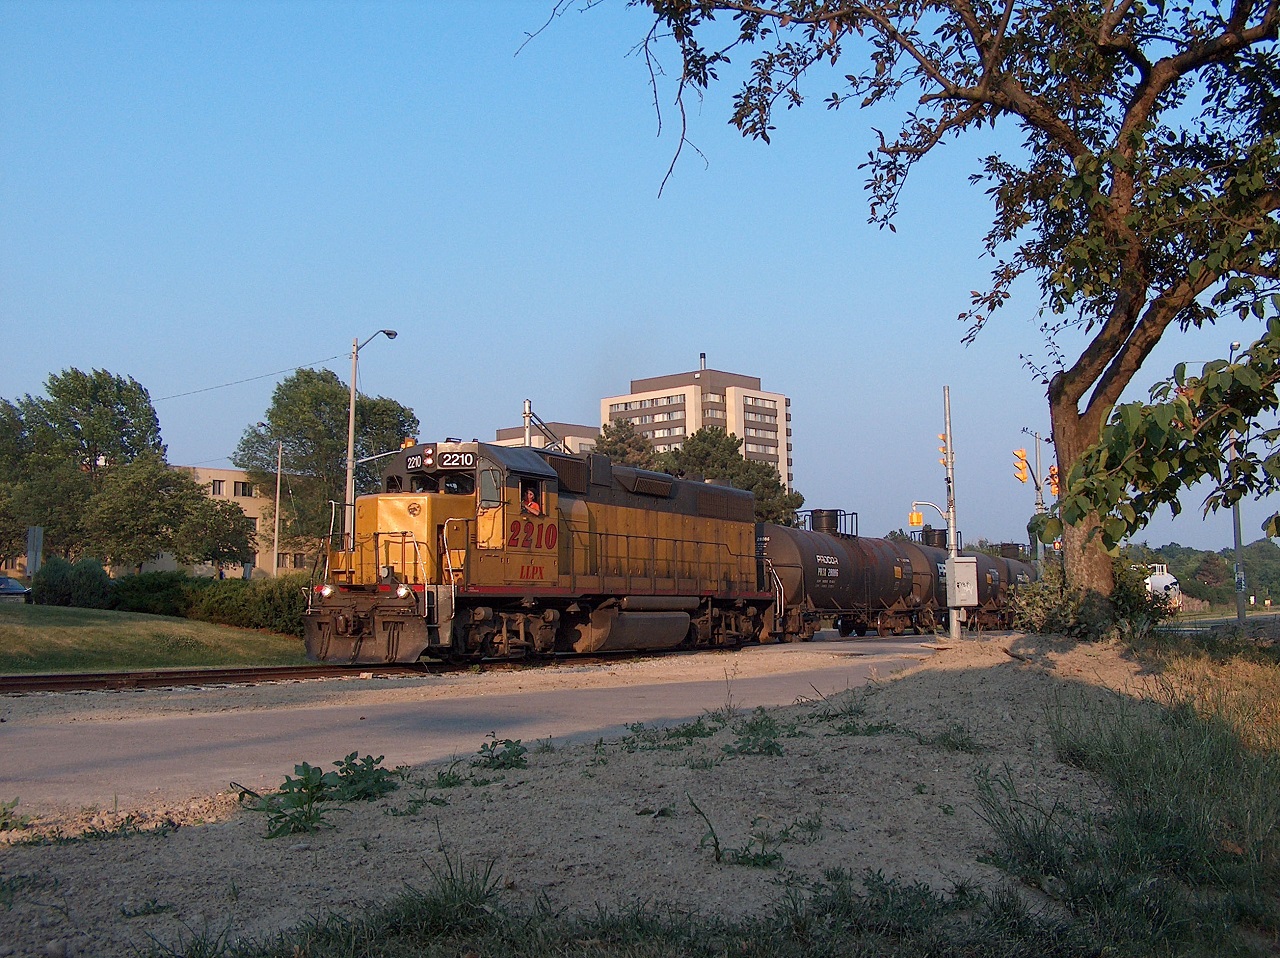 Ah, summer (well, technically very late spring)! The GEXR wayfreight to Elmira trundles northward on the Waterloo Spur just after 19:00 on a hot, sunny evening. They are crossing University Ave. at the University of Waterloo.